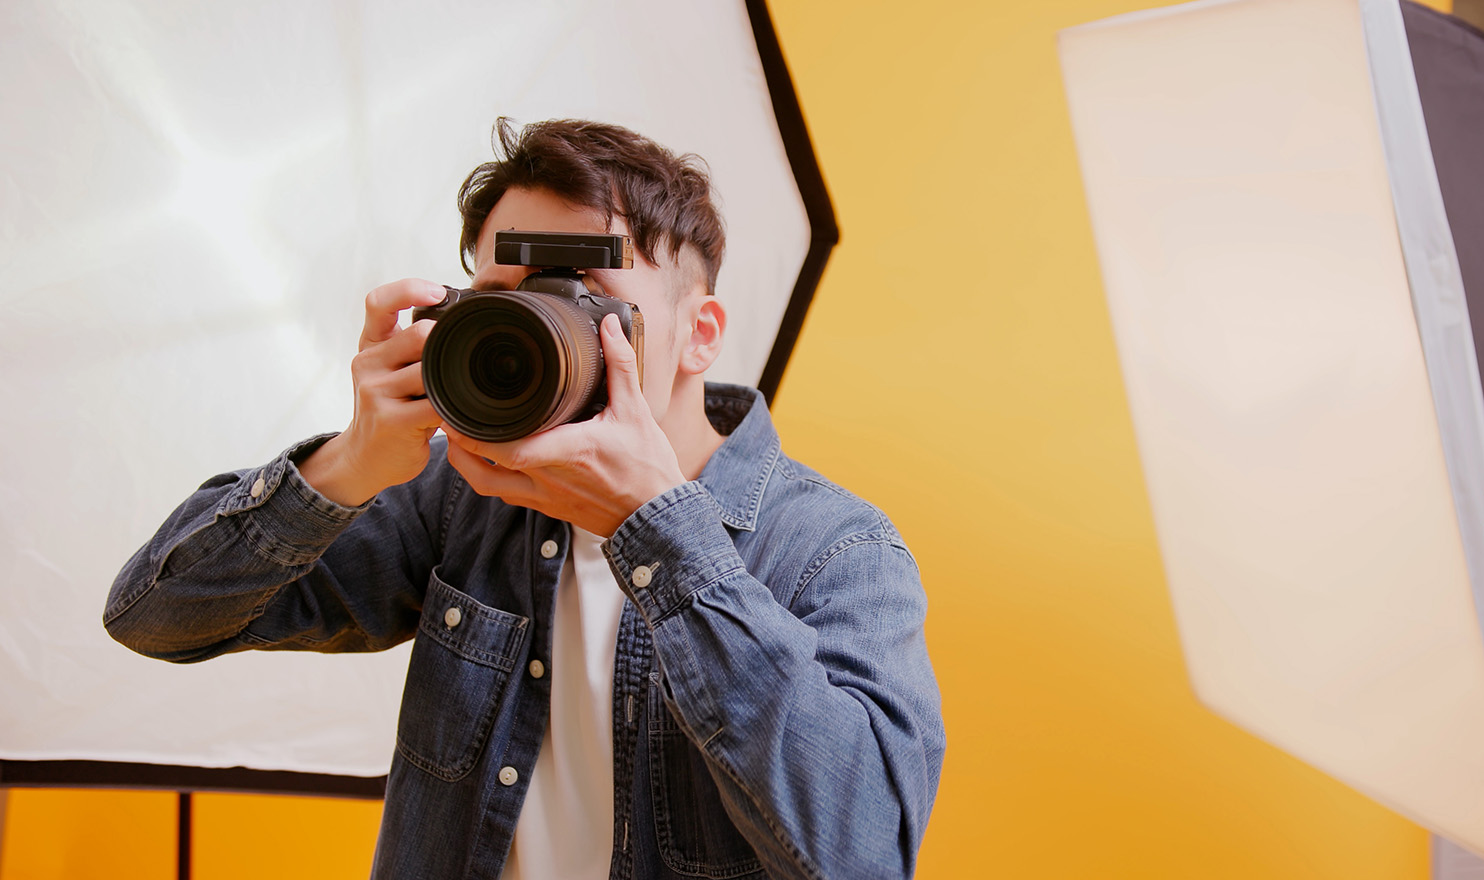 A waist up image of a young male photographer taking a photo with his camera aimed at you in a studio with a yellow backdrop and lighting equipment. ACT photography insurance may cover him at the next event he attends to sell his photos at.